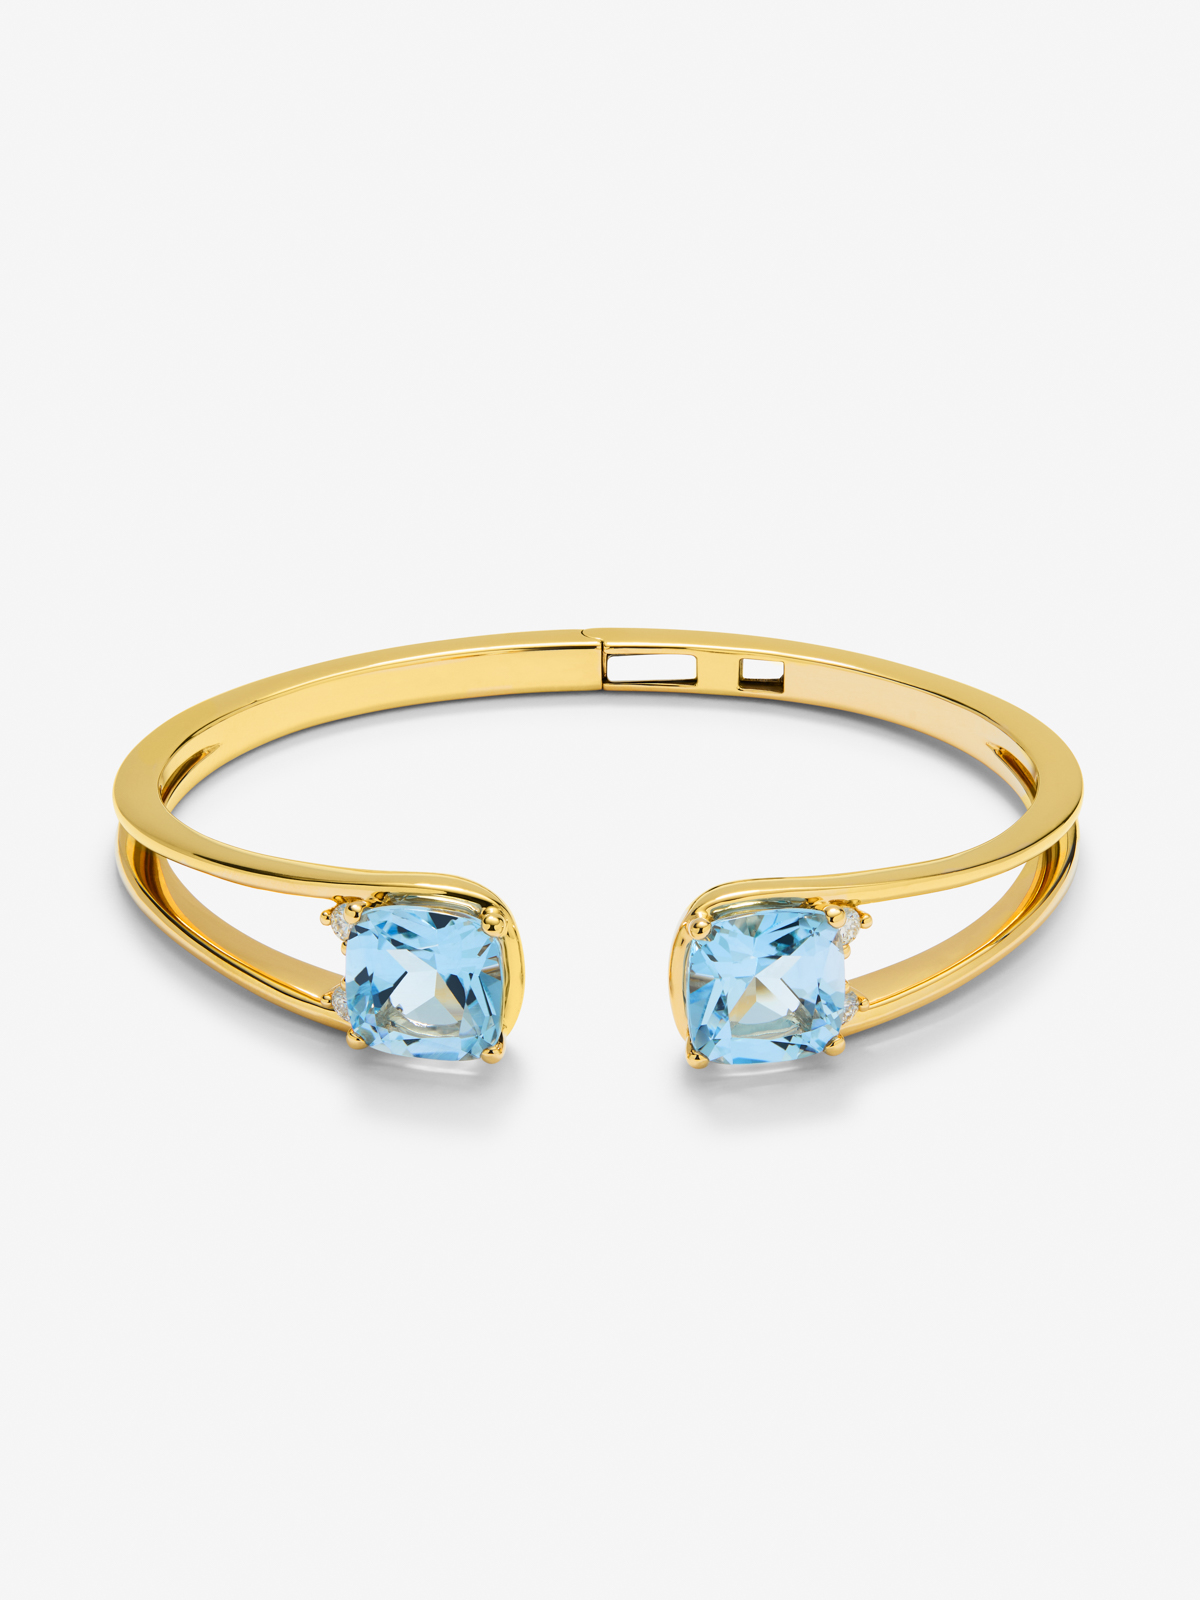 18kt yellow gold bracelet with Sky Topacios